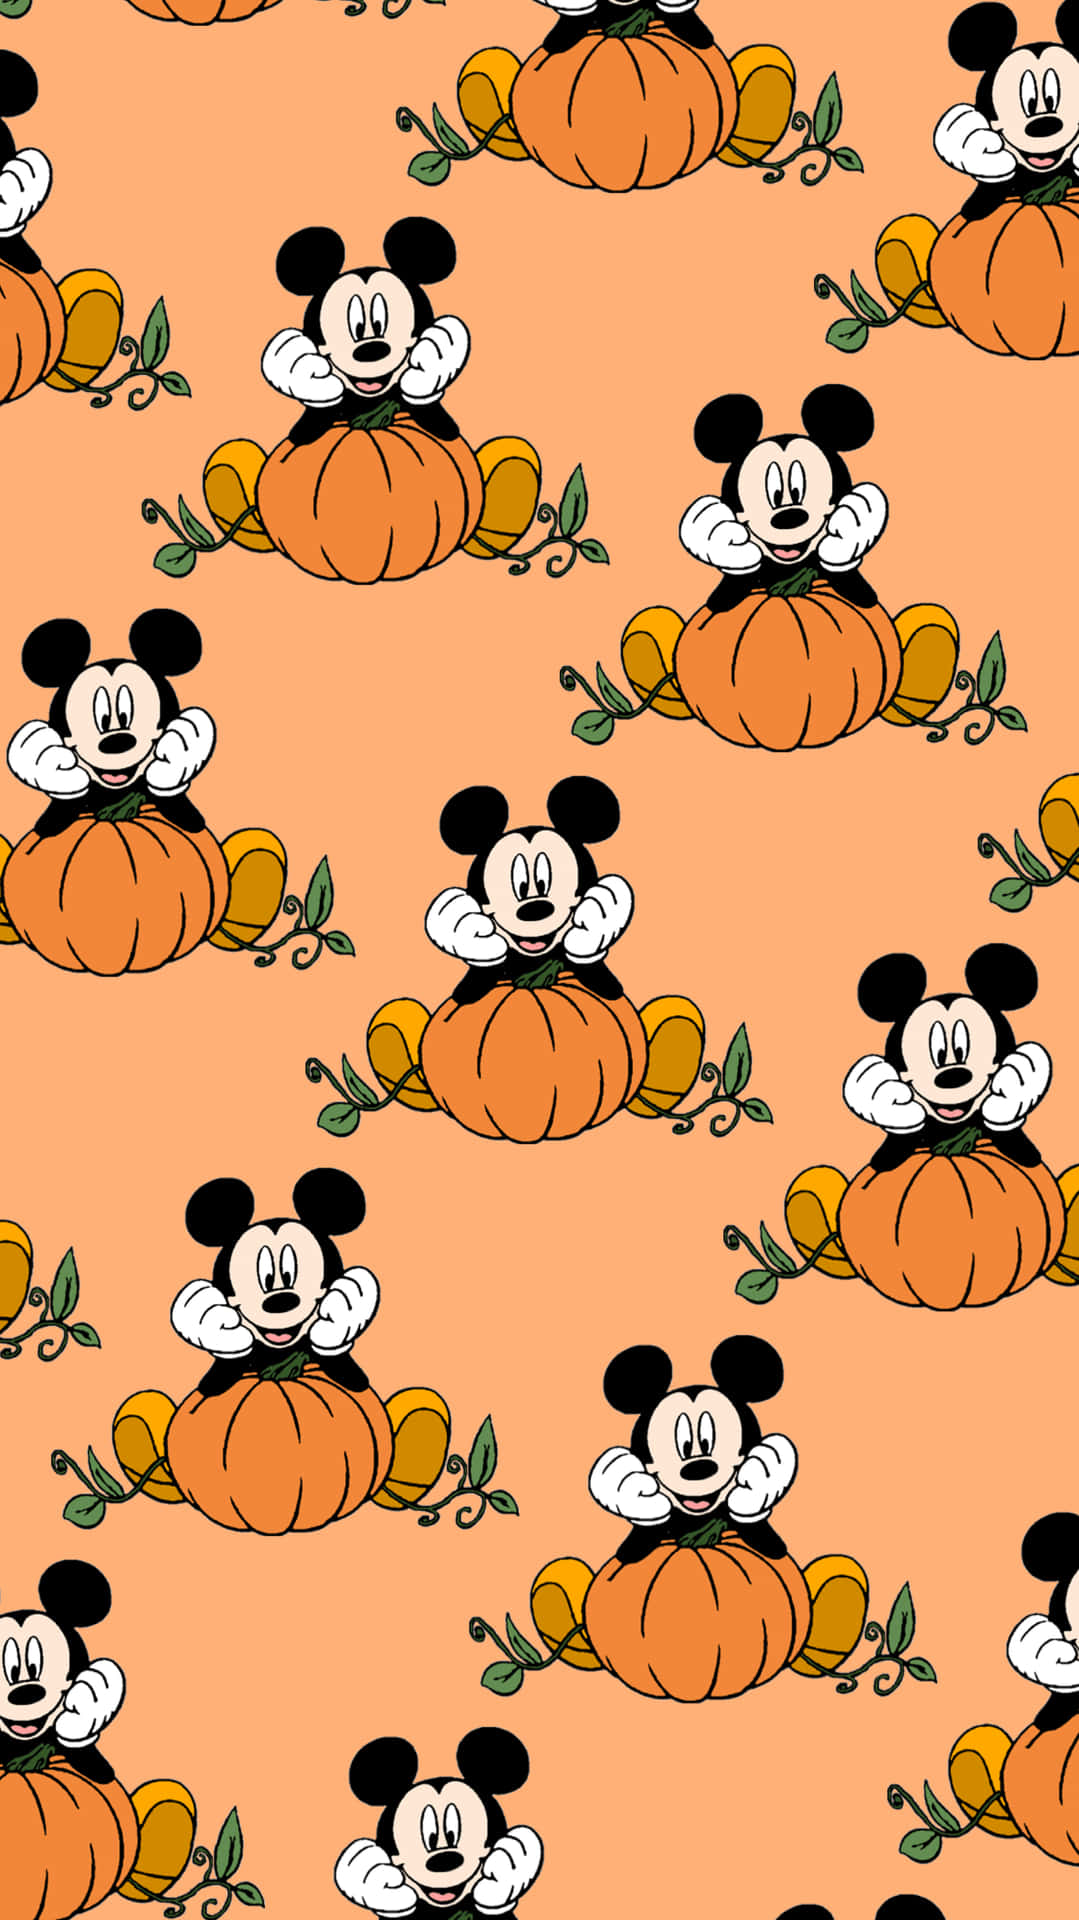 "Welcome spooky season with this Cute Halloween Picture!"